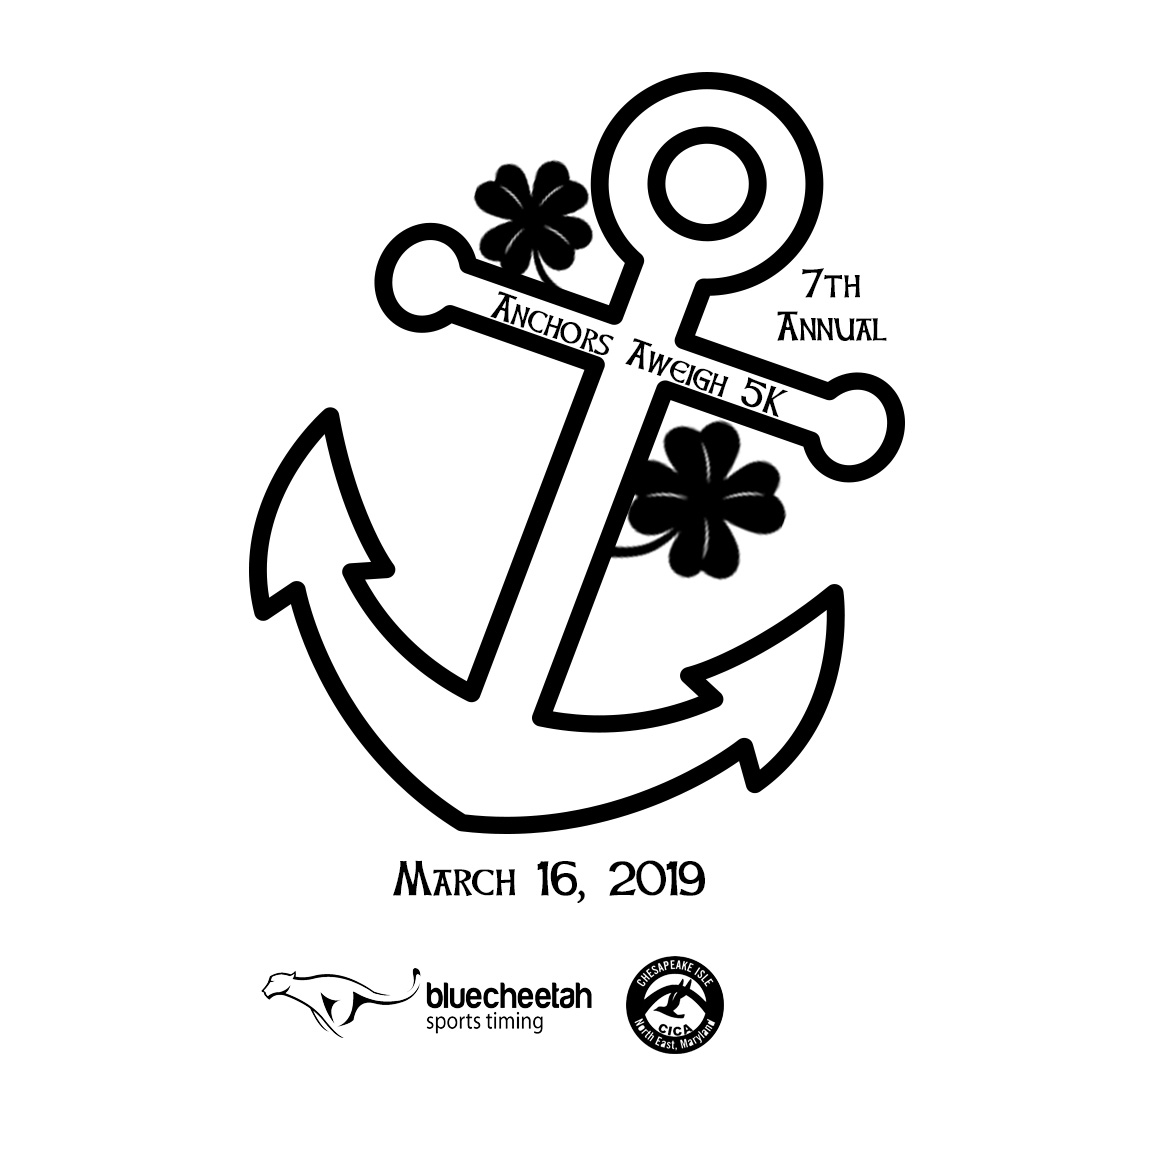 Anchors Aweigh 5K logo on RaceRaves